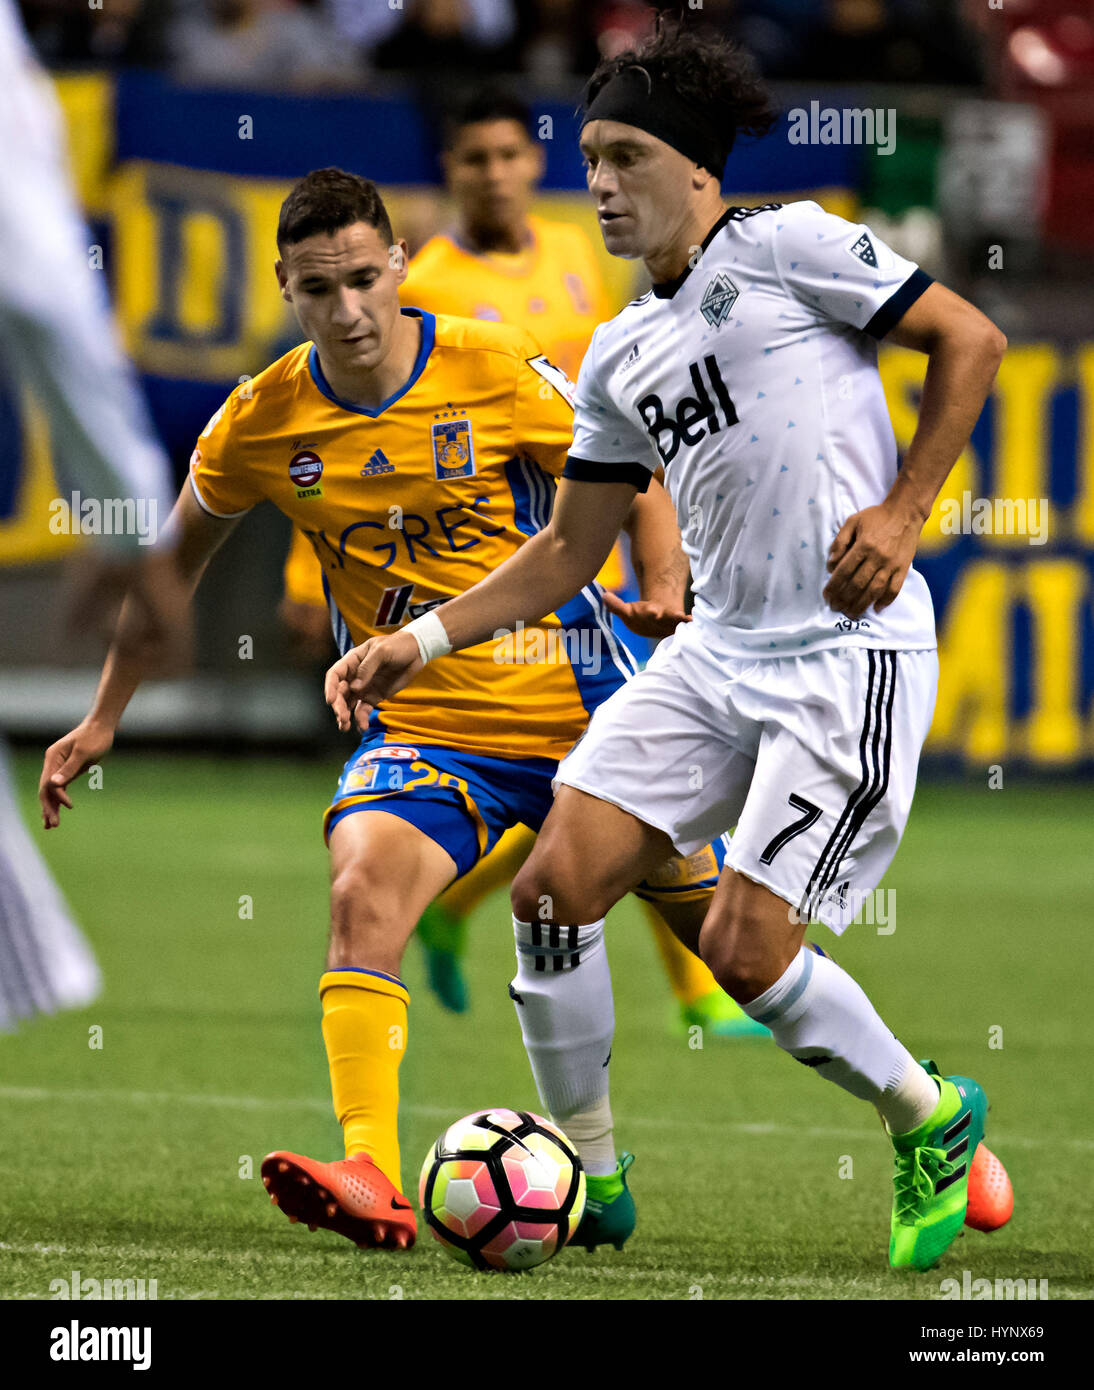 (170406) -- VANCOUVER, April, 6, 2017 (Xinhua) -- Jesus Duenas Manzo(L) of Mexico's Tigres UANL vies with Christian Bolanos Navarro of Major League Soccer's Canadian Vancouver Whitecaps during the second-leg match of the CONCACAF Champions League 2016/2017 Semifinal in Vancouver, Canada, April 5, 2017. Tigres UANL won 2-1 and advanced to the final with 4-1 on aggregate. (Xinhua/Andrew Soong) Stock Photo